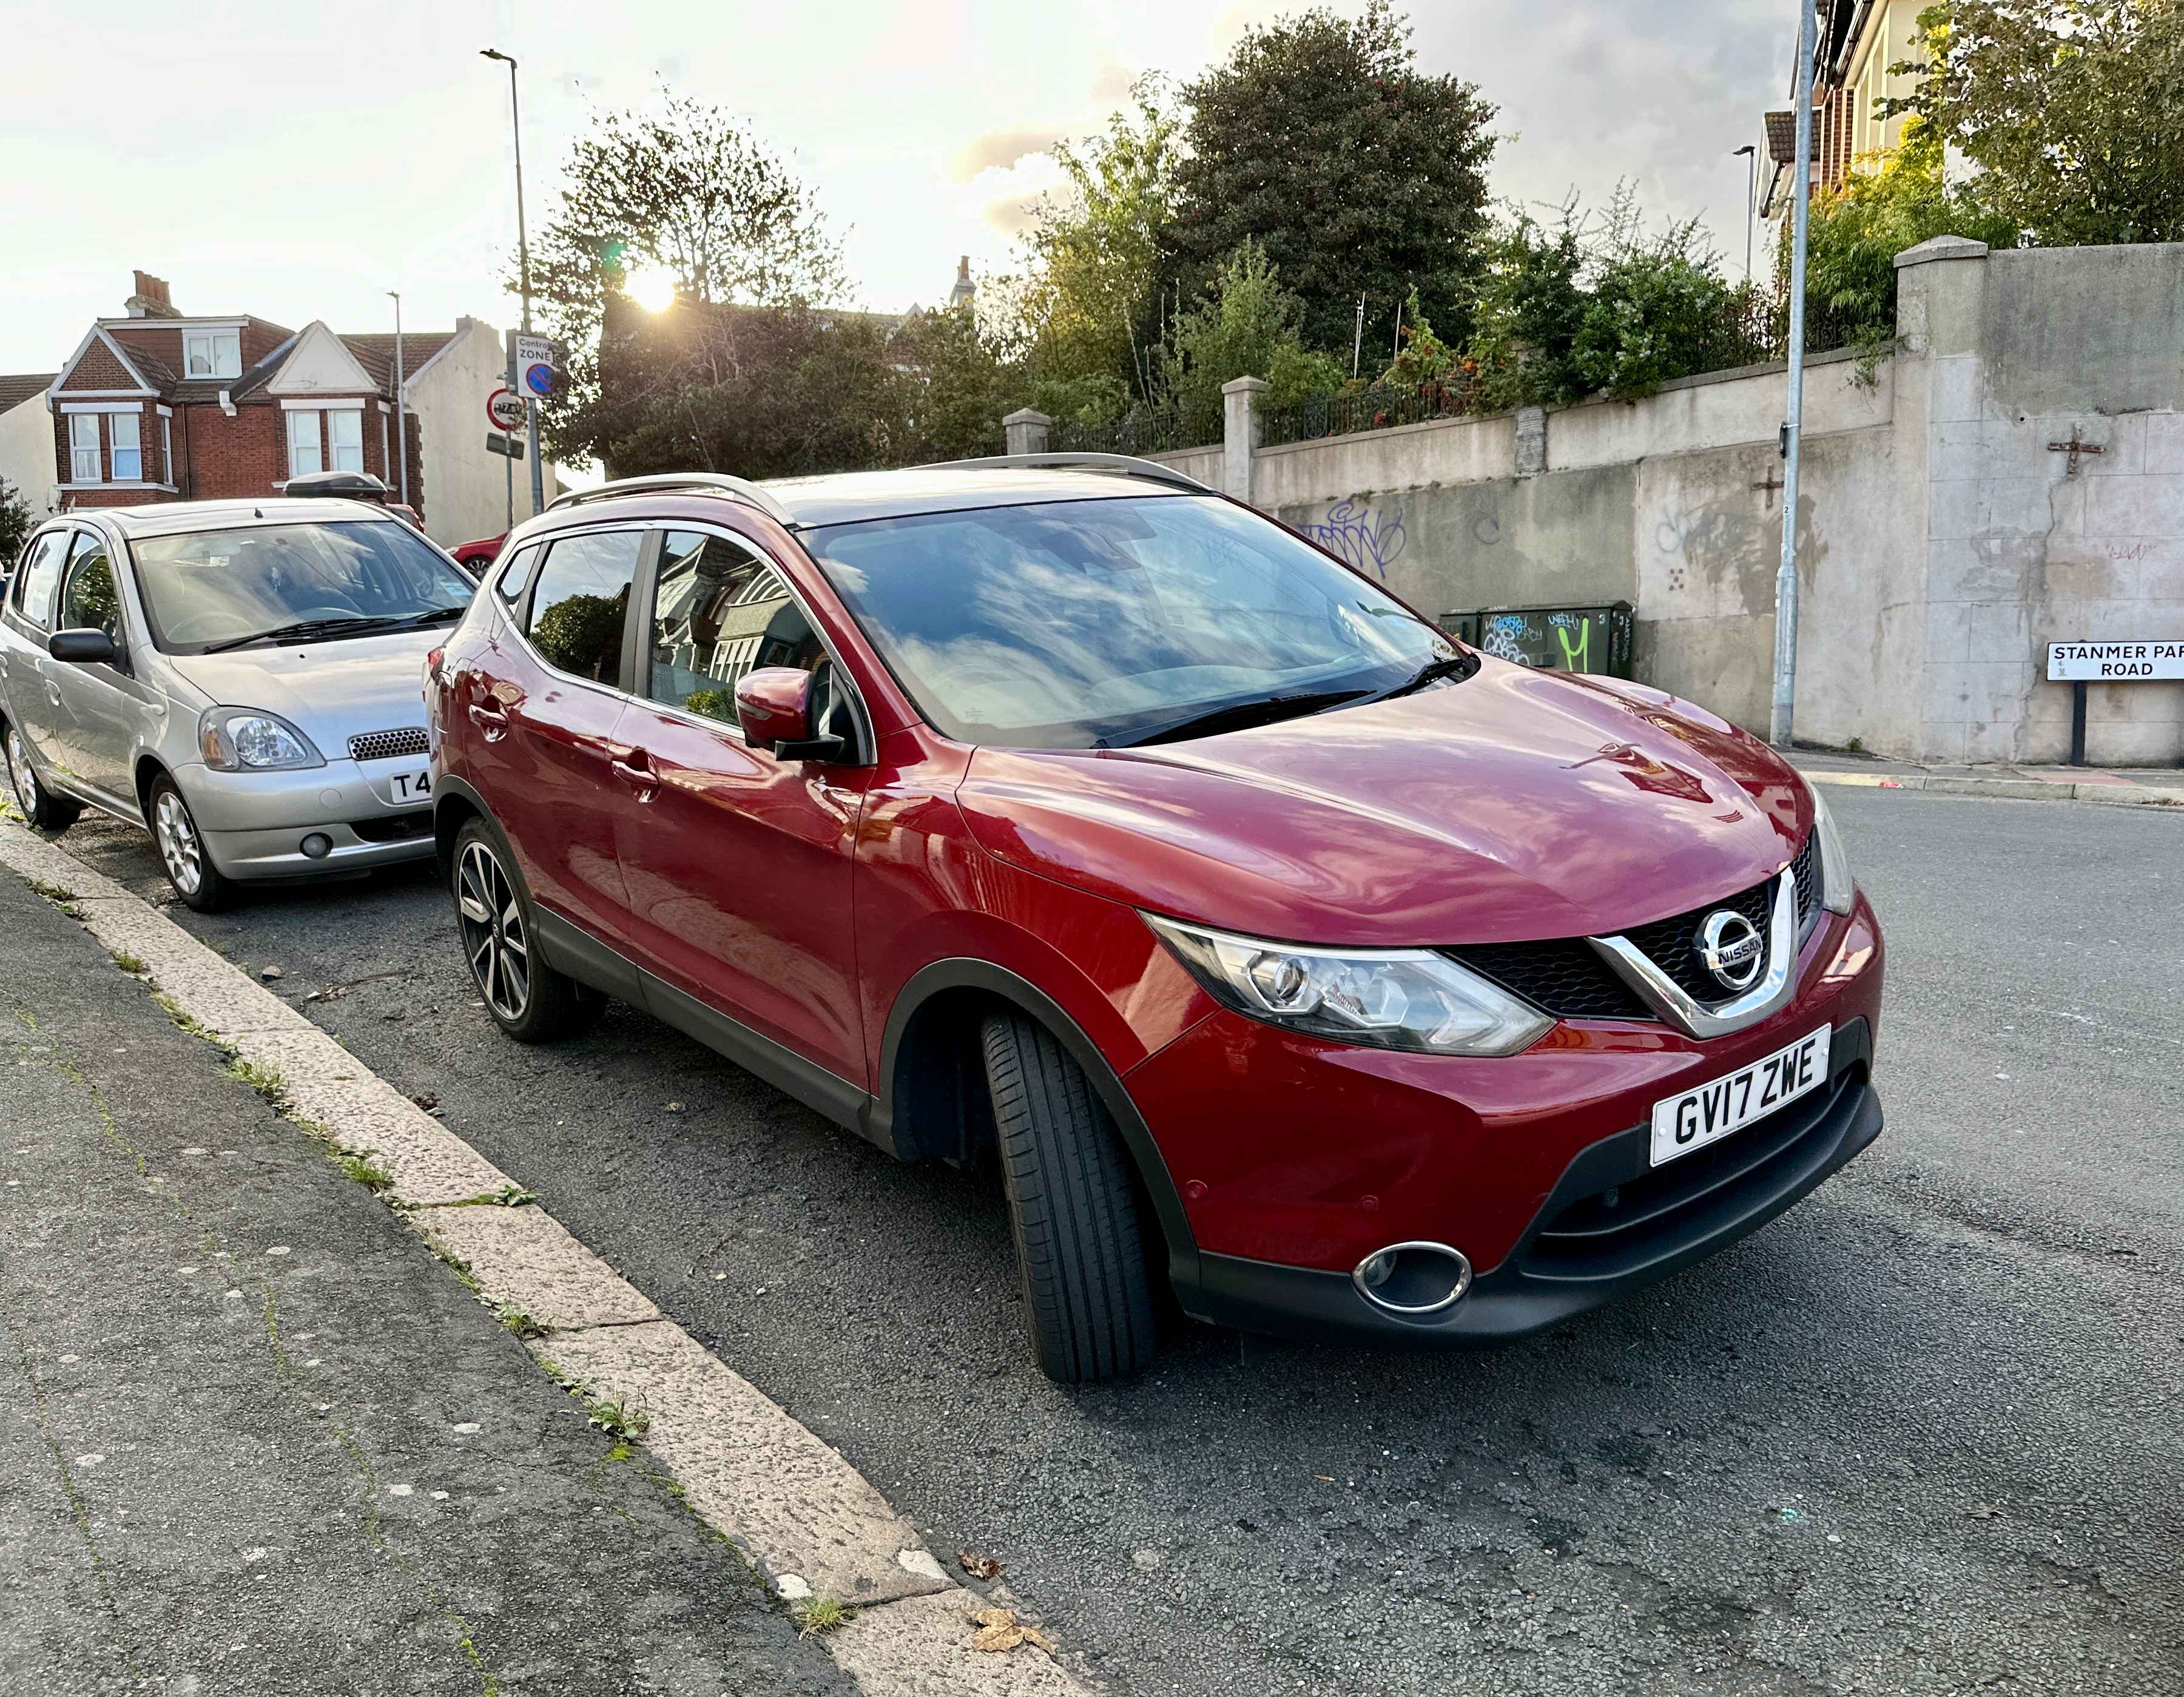 Photograph of GV17 ZWE - a Red Nissan Qashqai parked in Hollingdean by a non-resident. The first of four photographs supplied by the residents of Hollingdean.